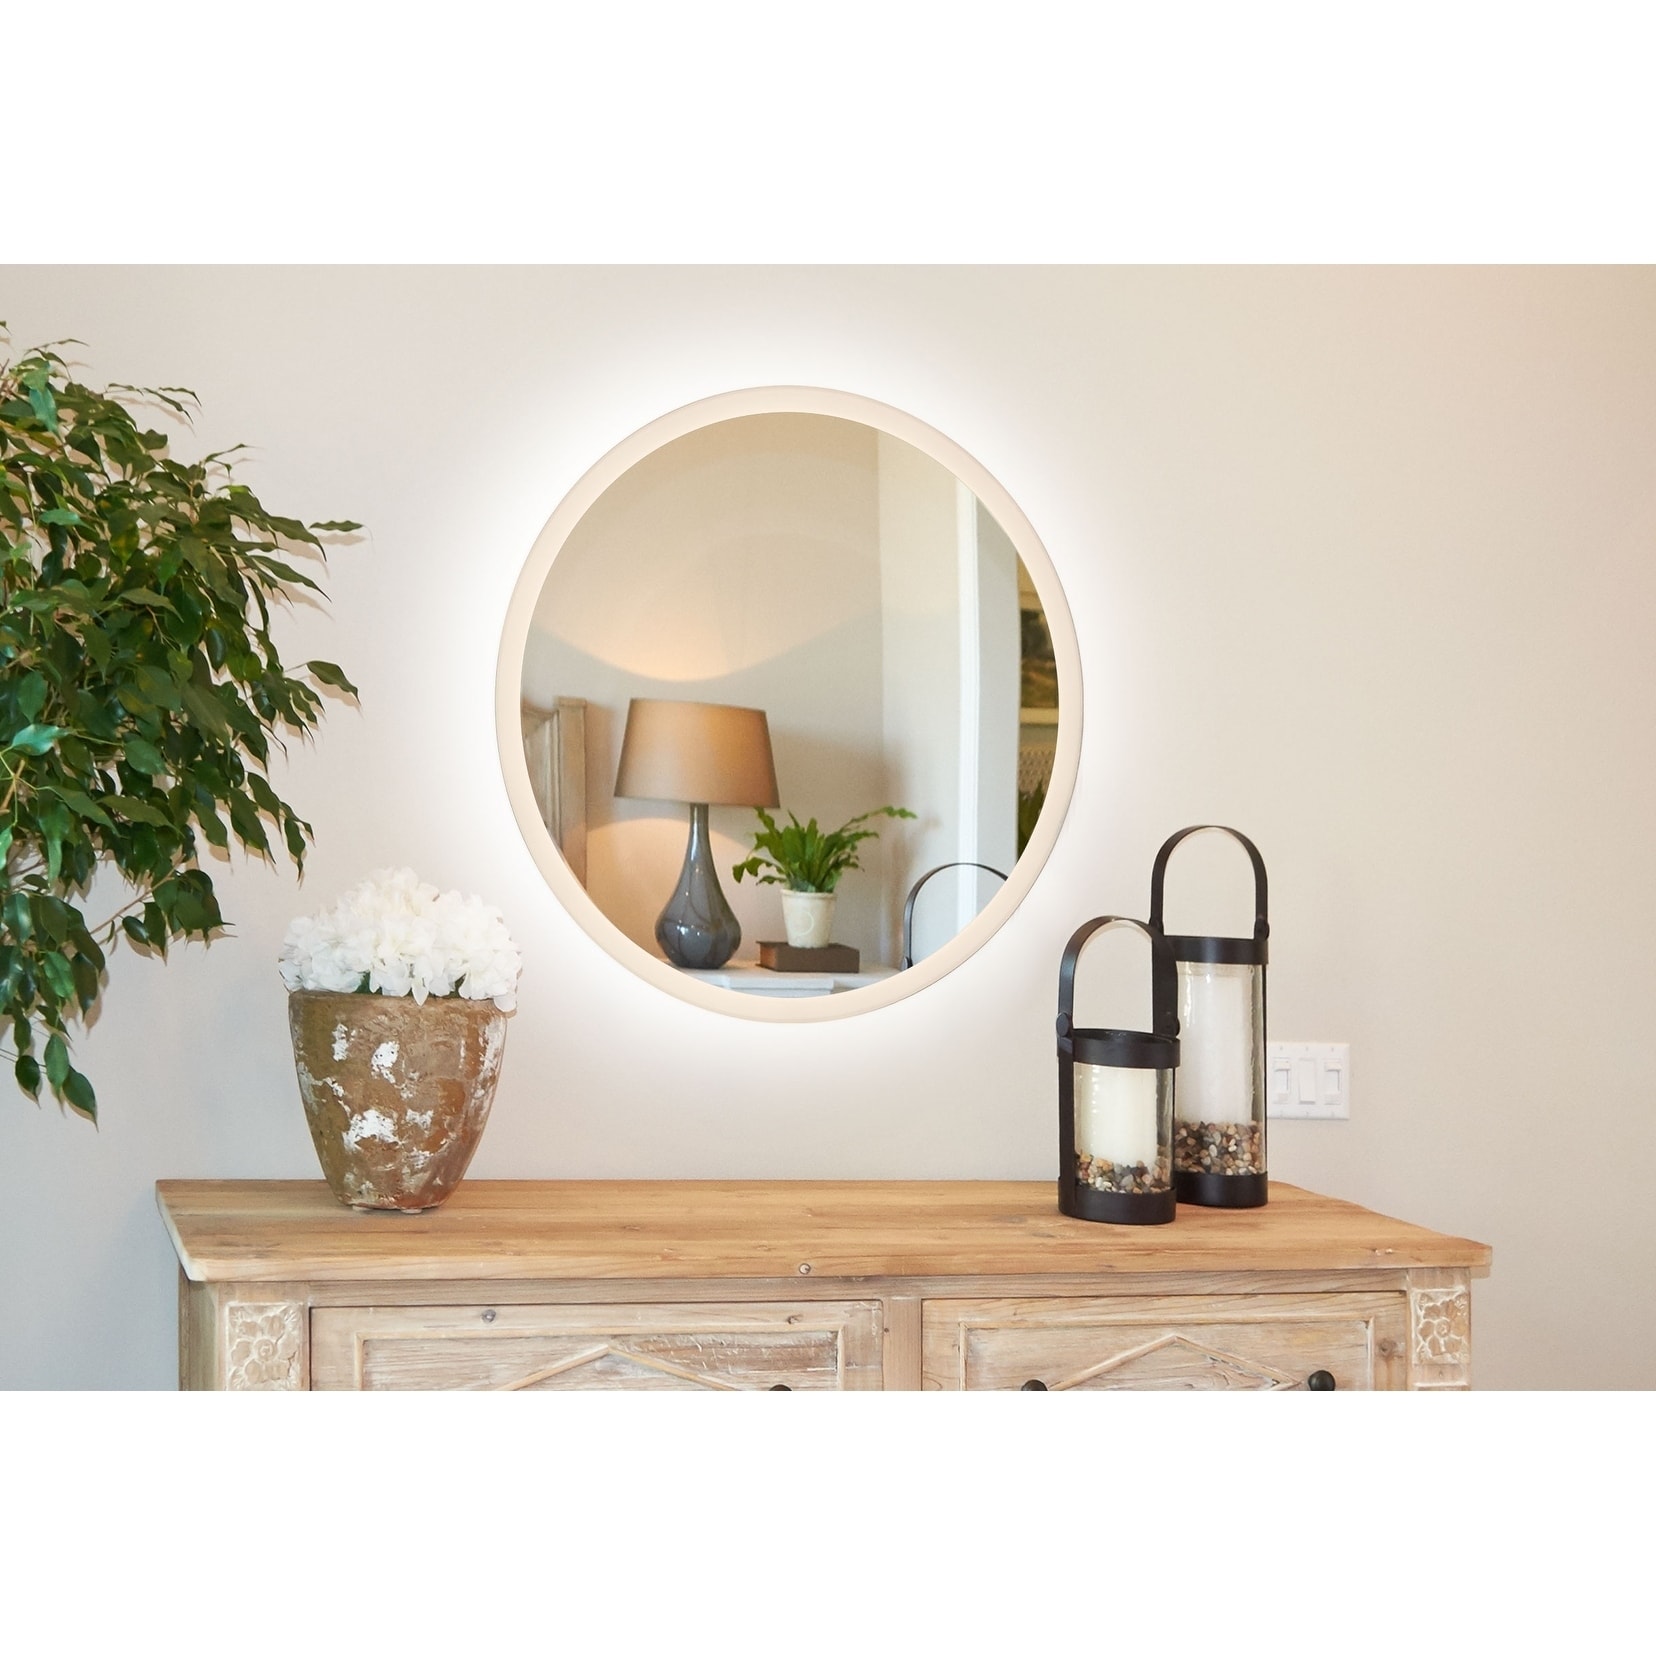 Innoci-USA Apollo Round LED Wall Mount Lighted Vanity Mirror Featuring Dual Color and Smart Touch Control 36" dia.